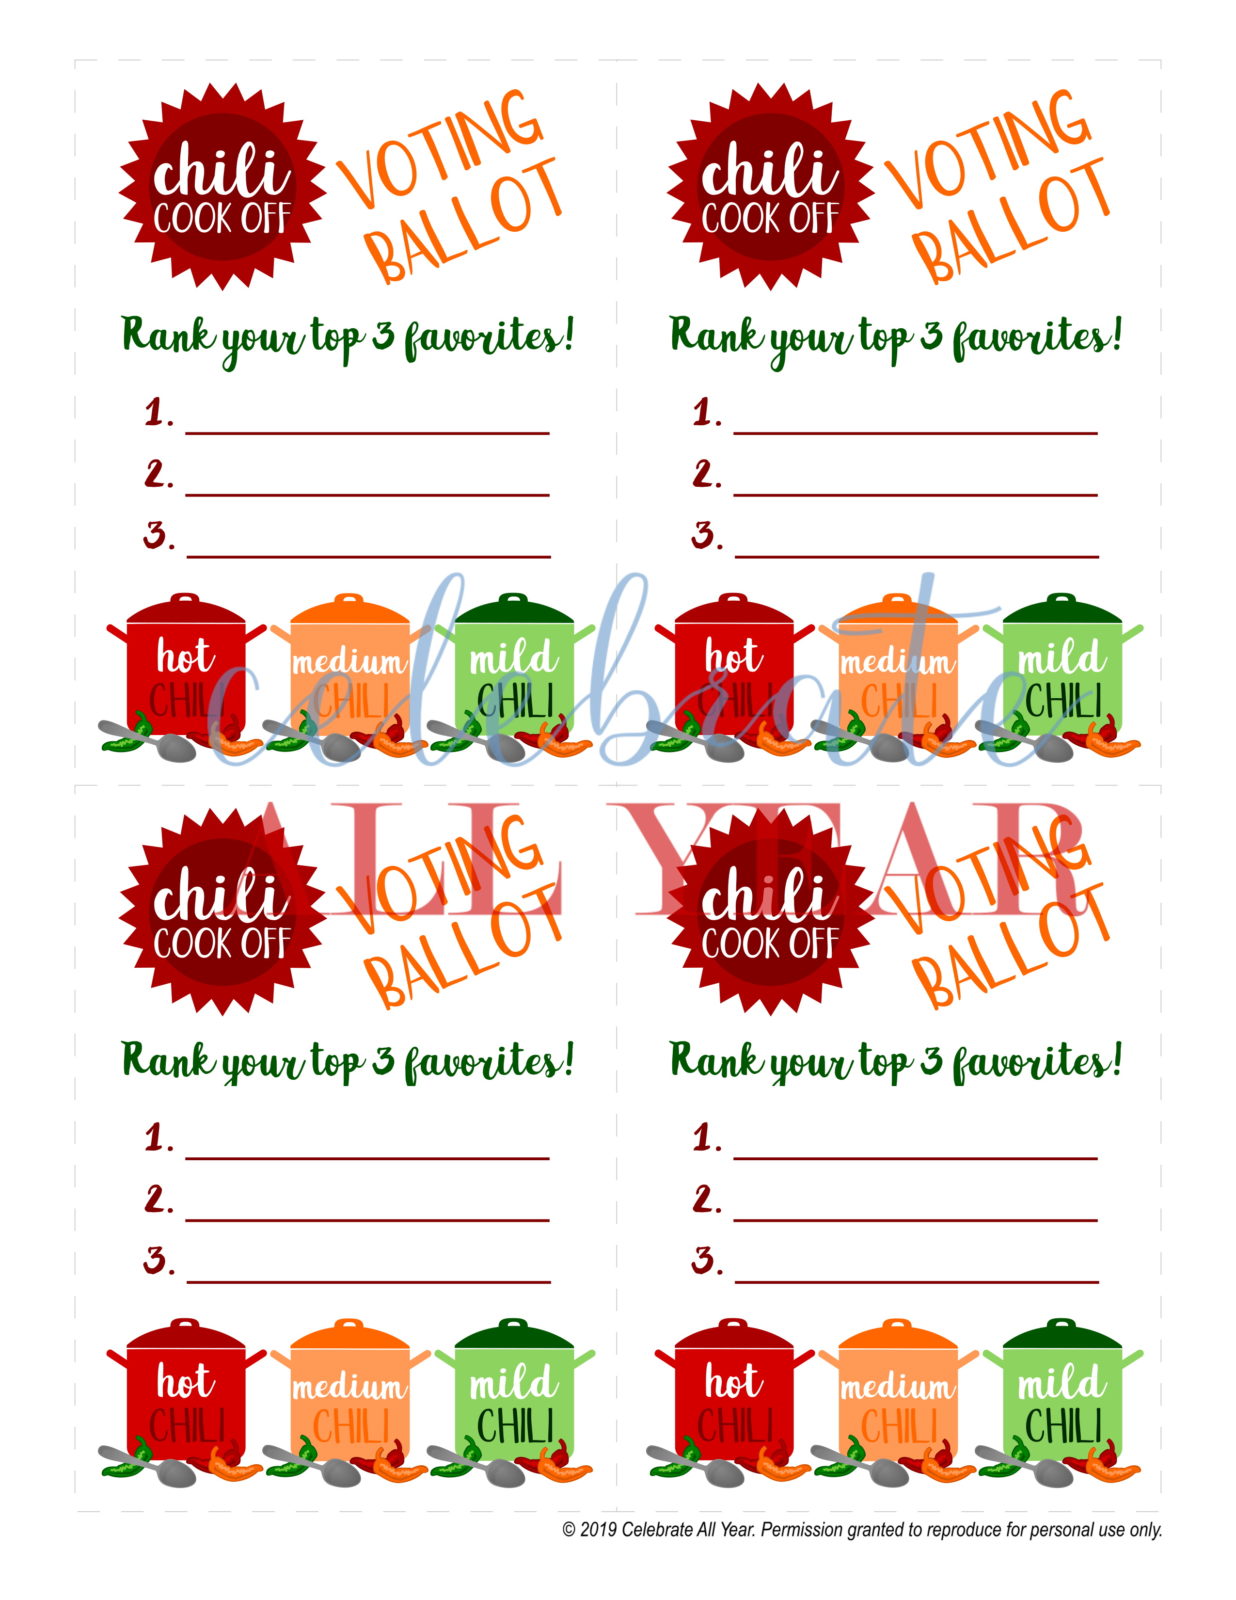 chili-cook-off-voting-cards-printable-cards